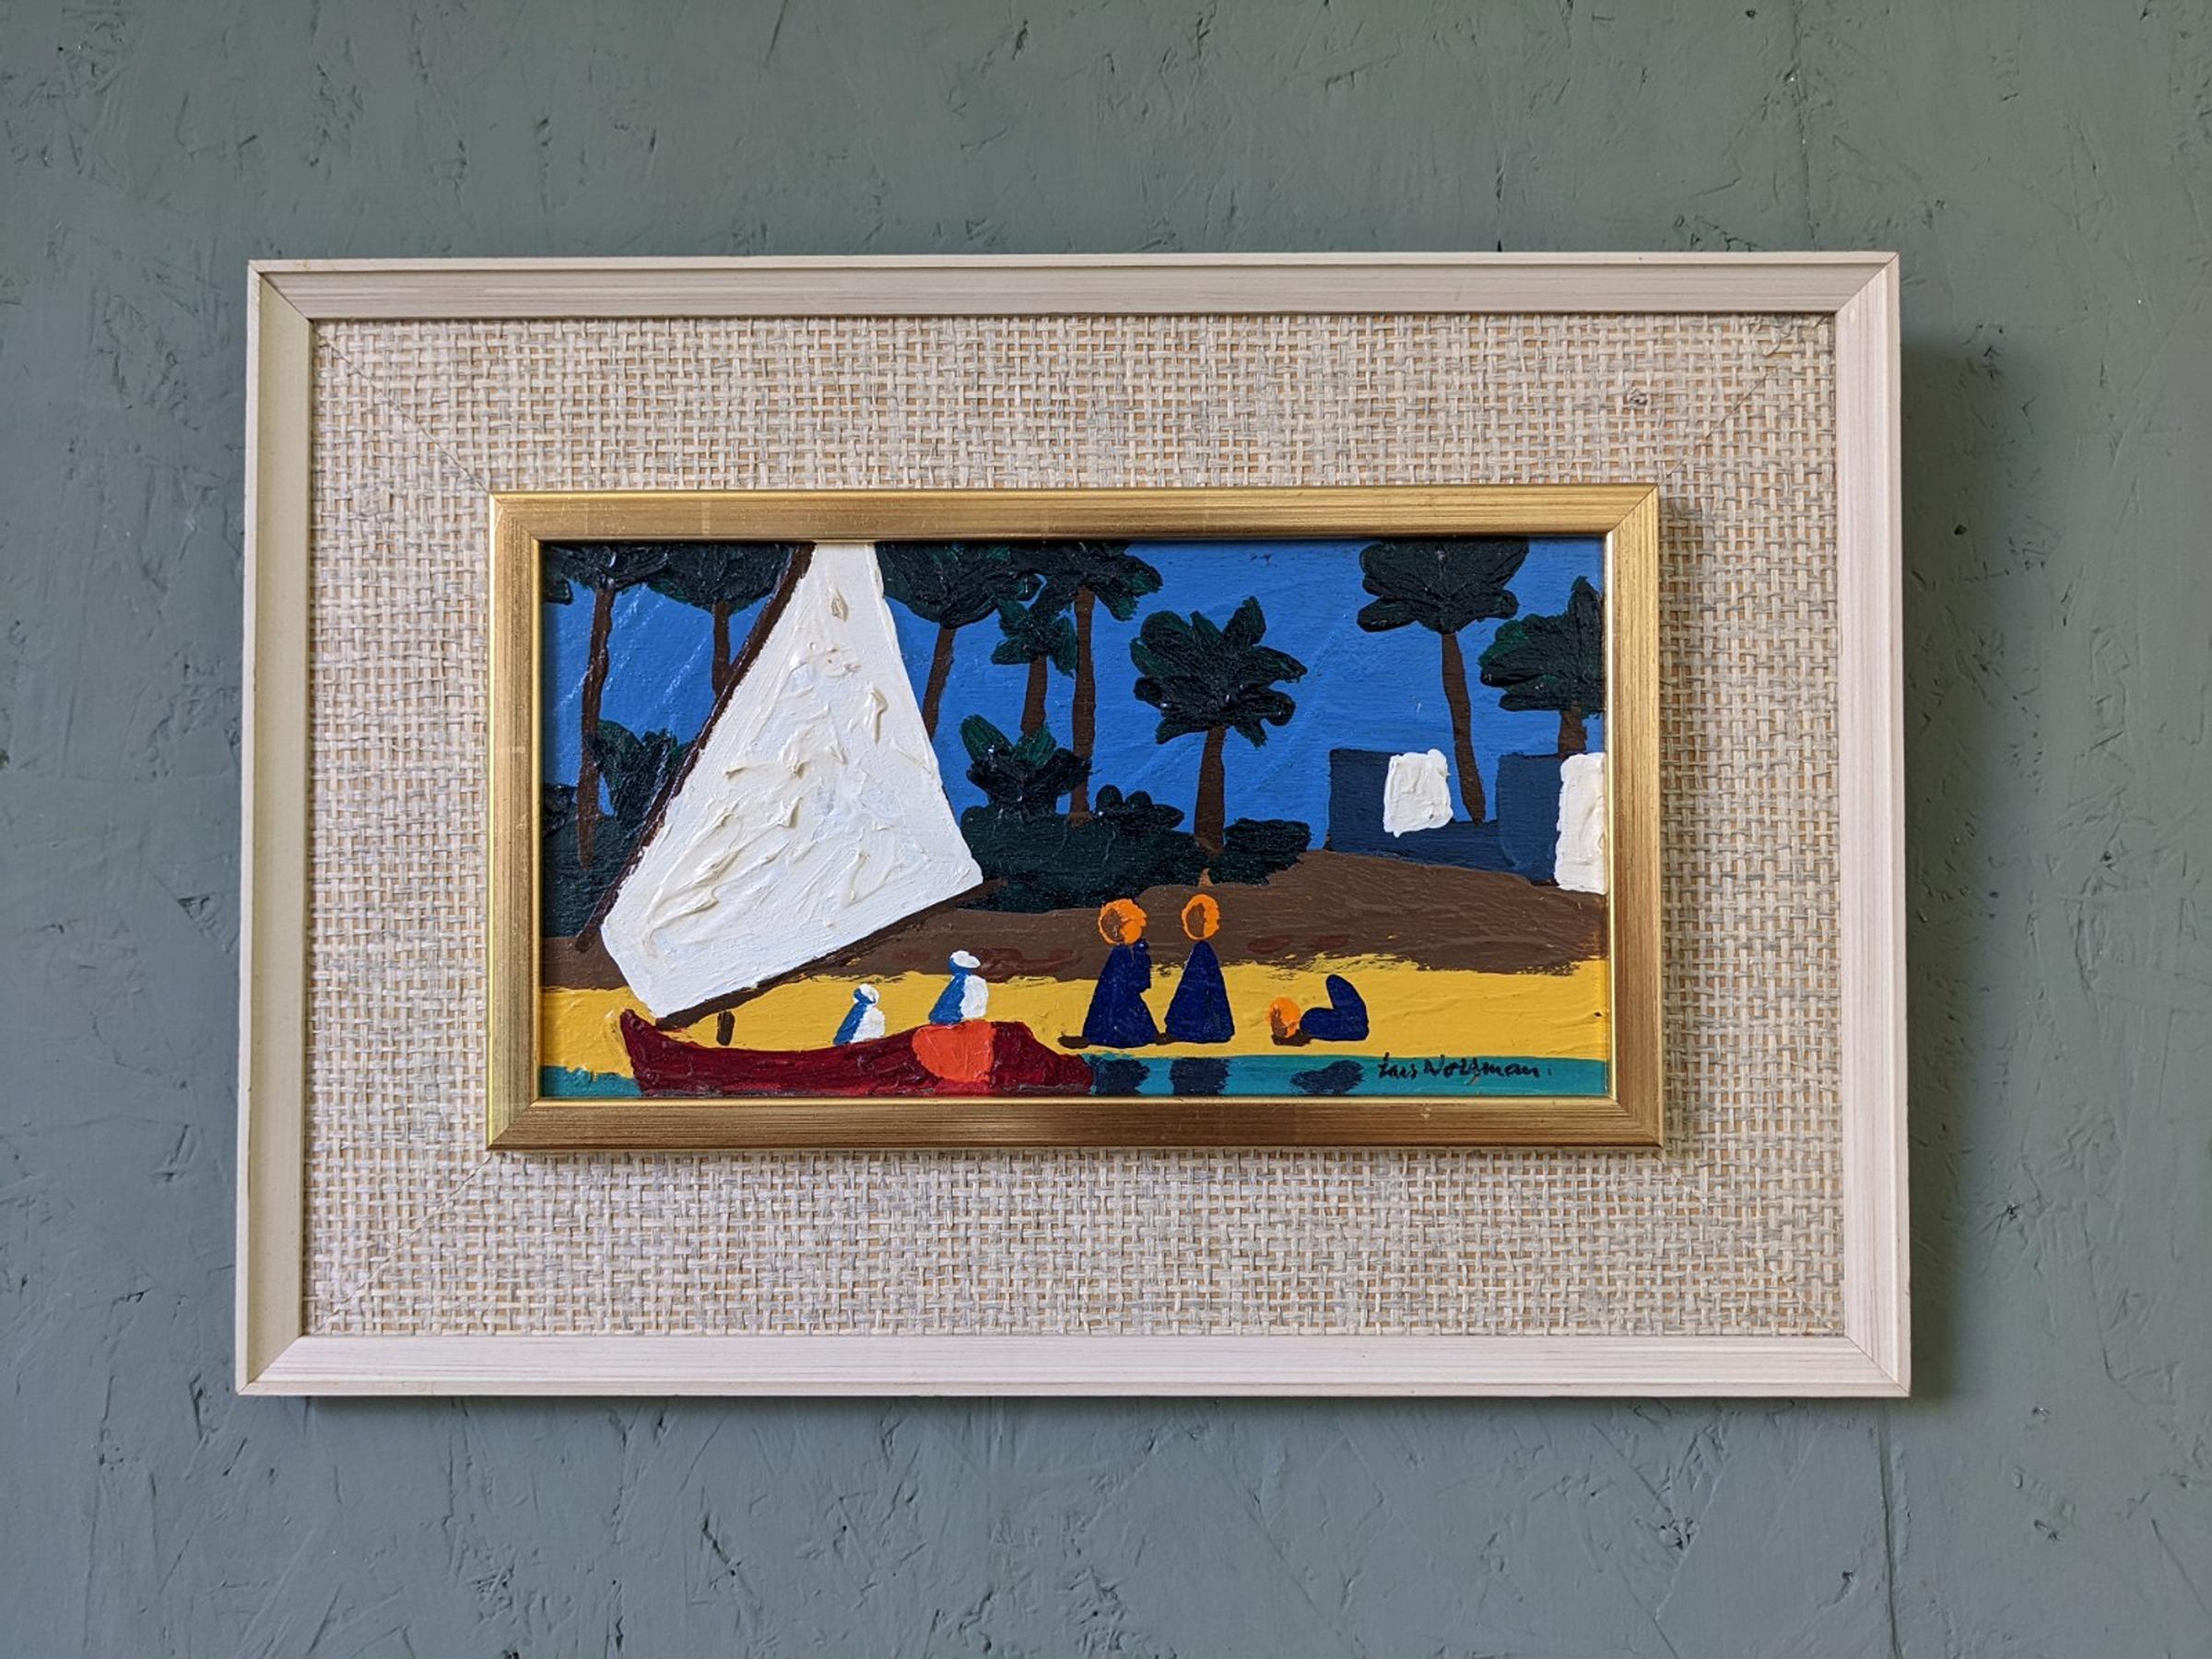 SEASIDE
Size: 28.5 x 41 cm (including frame)
Oil on Board 

A small yet impactful mid-century modernist painting, executed in oil onto board.

The composition presents a scenic and inviting view of a seaside, lined with palm trees. In the